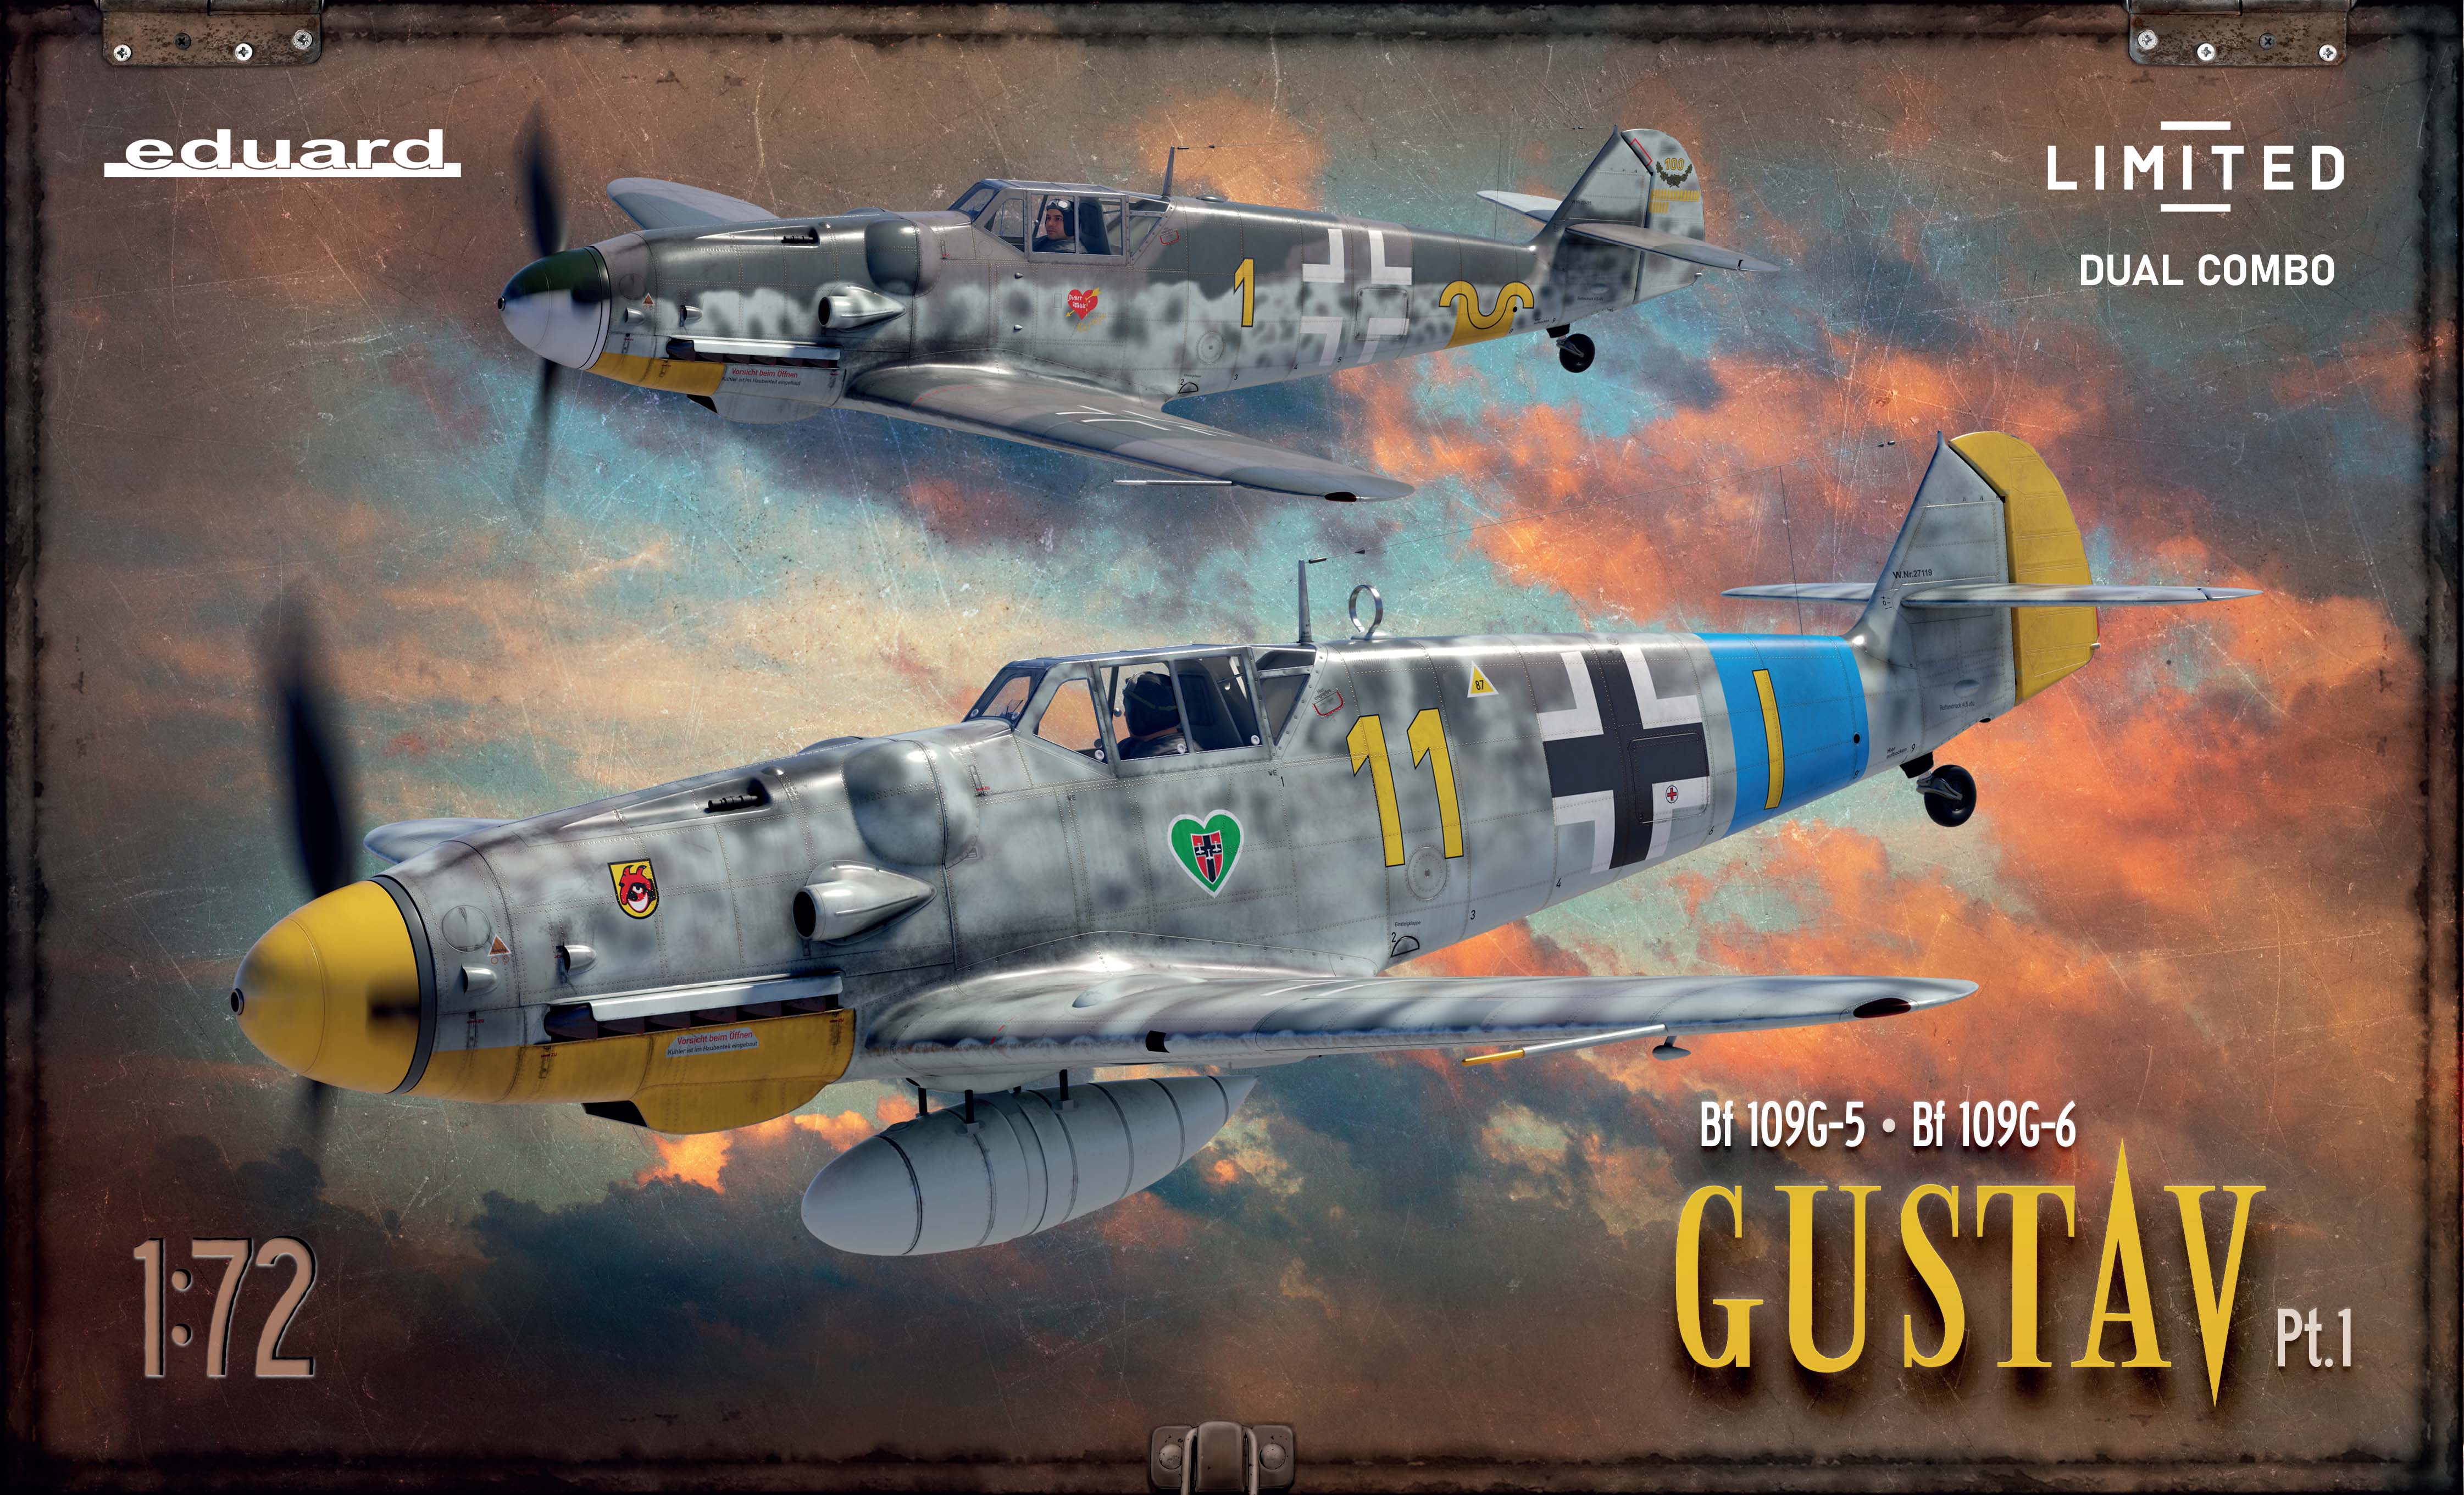 1/72 Bf 109G-5 a G-6 (GUSTAV pt.1) DUAL COMBO (Limited edition)